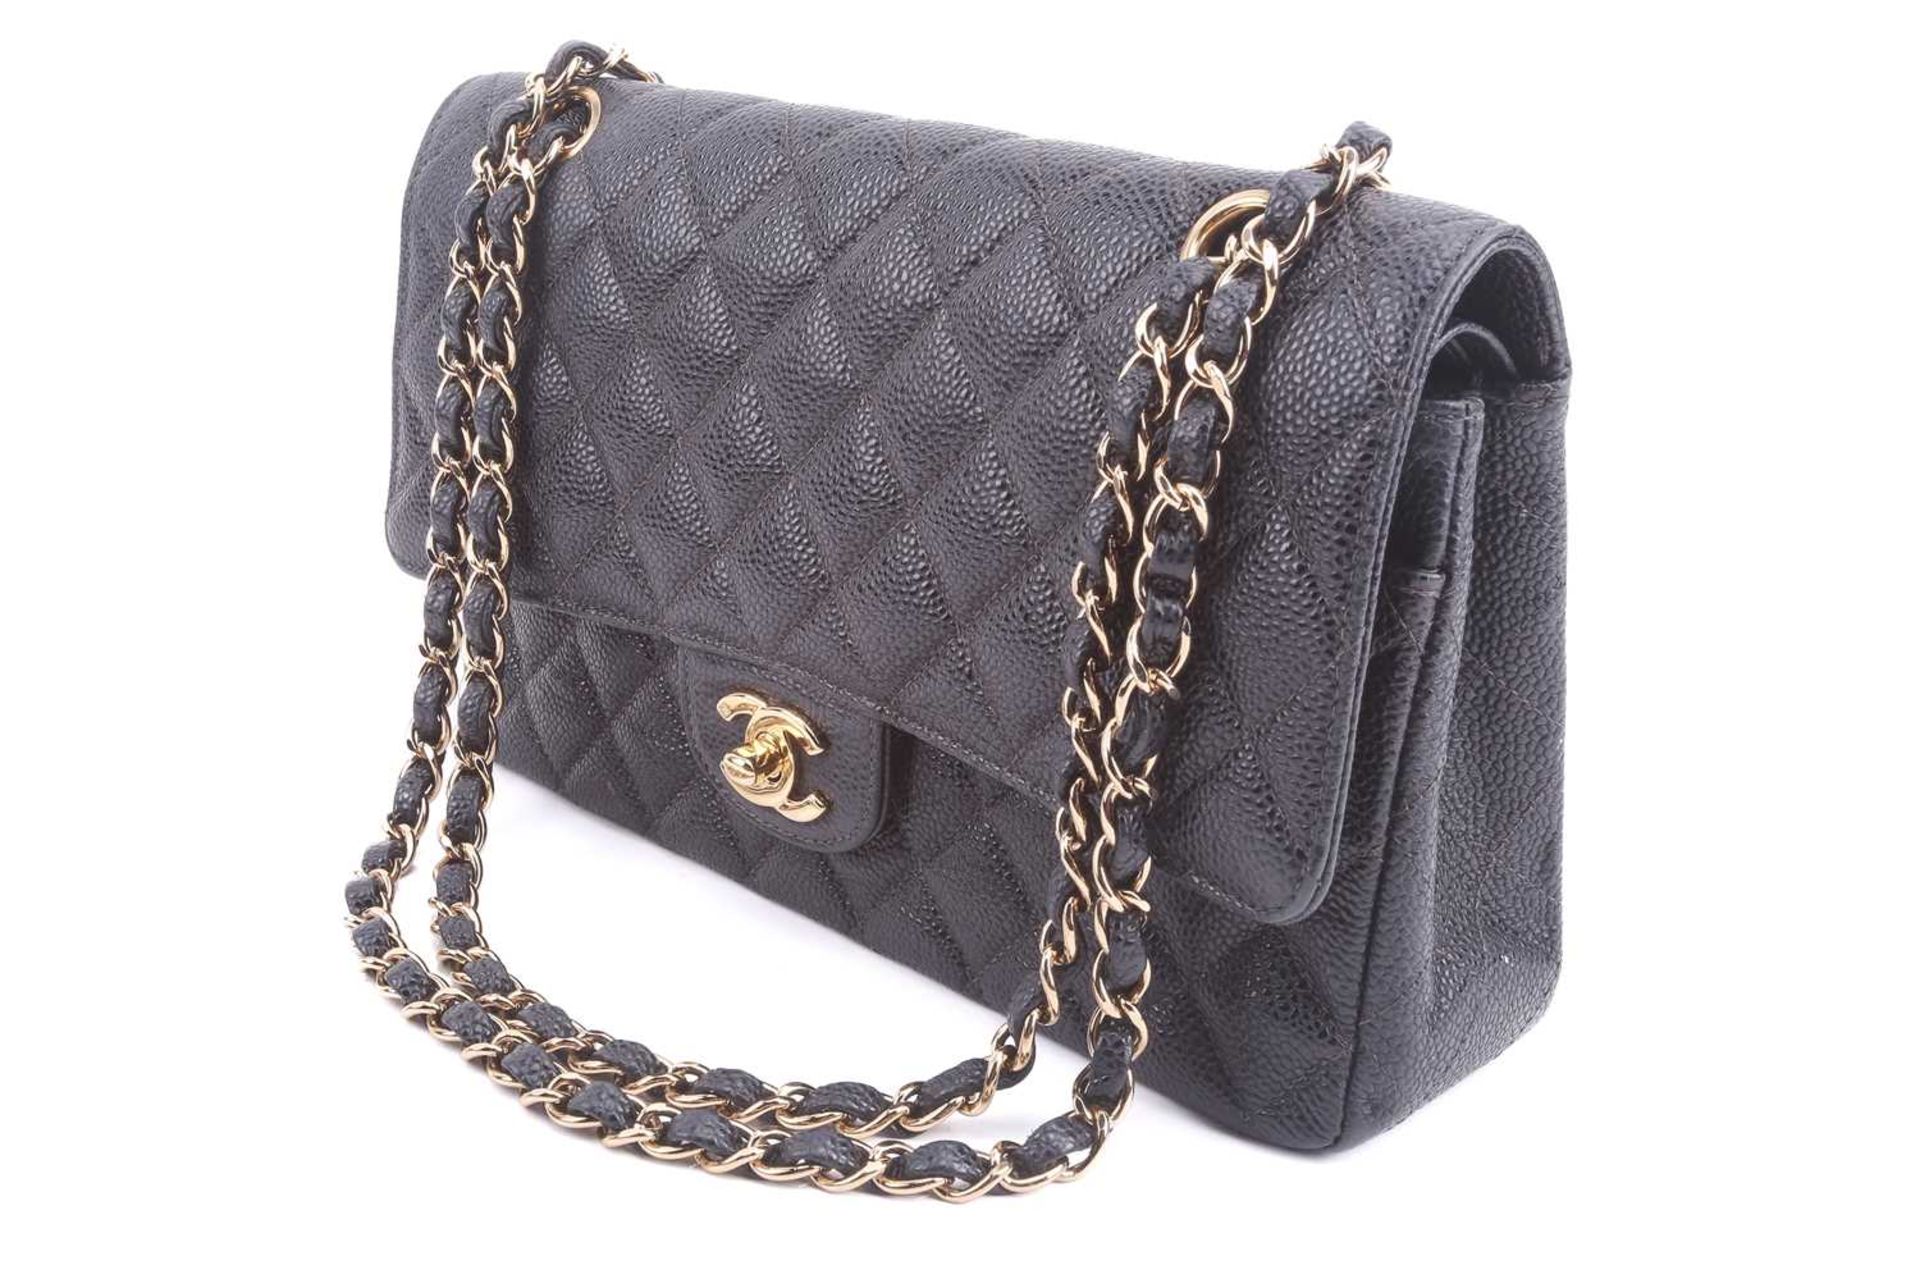 Chanel - a medium classic double flap bag in black diamond-quilted caviar leather, circa 2003, - Image 3 of 11